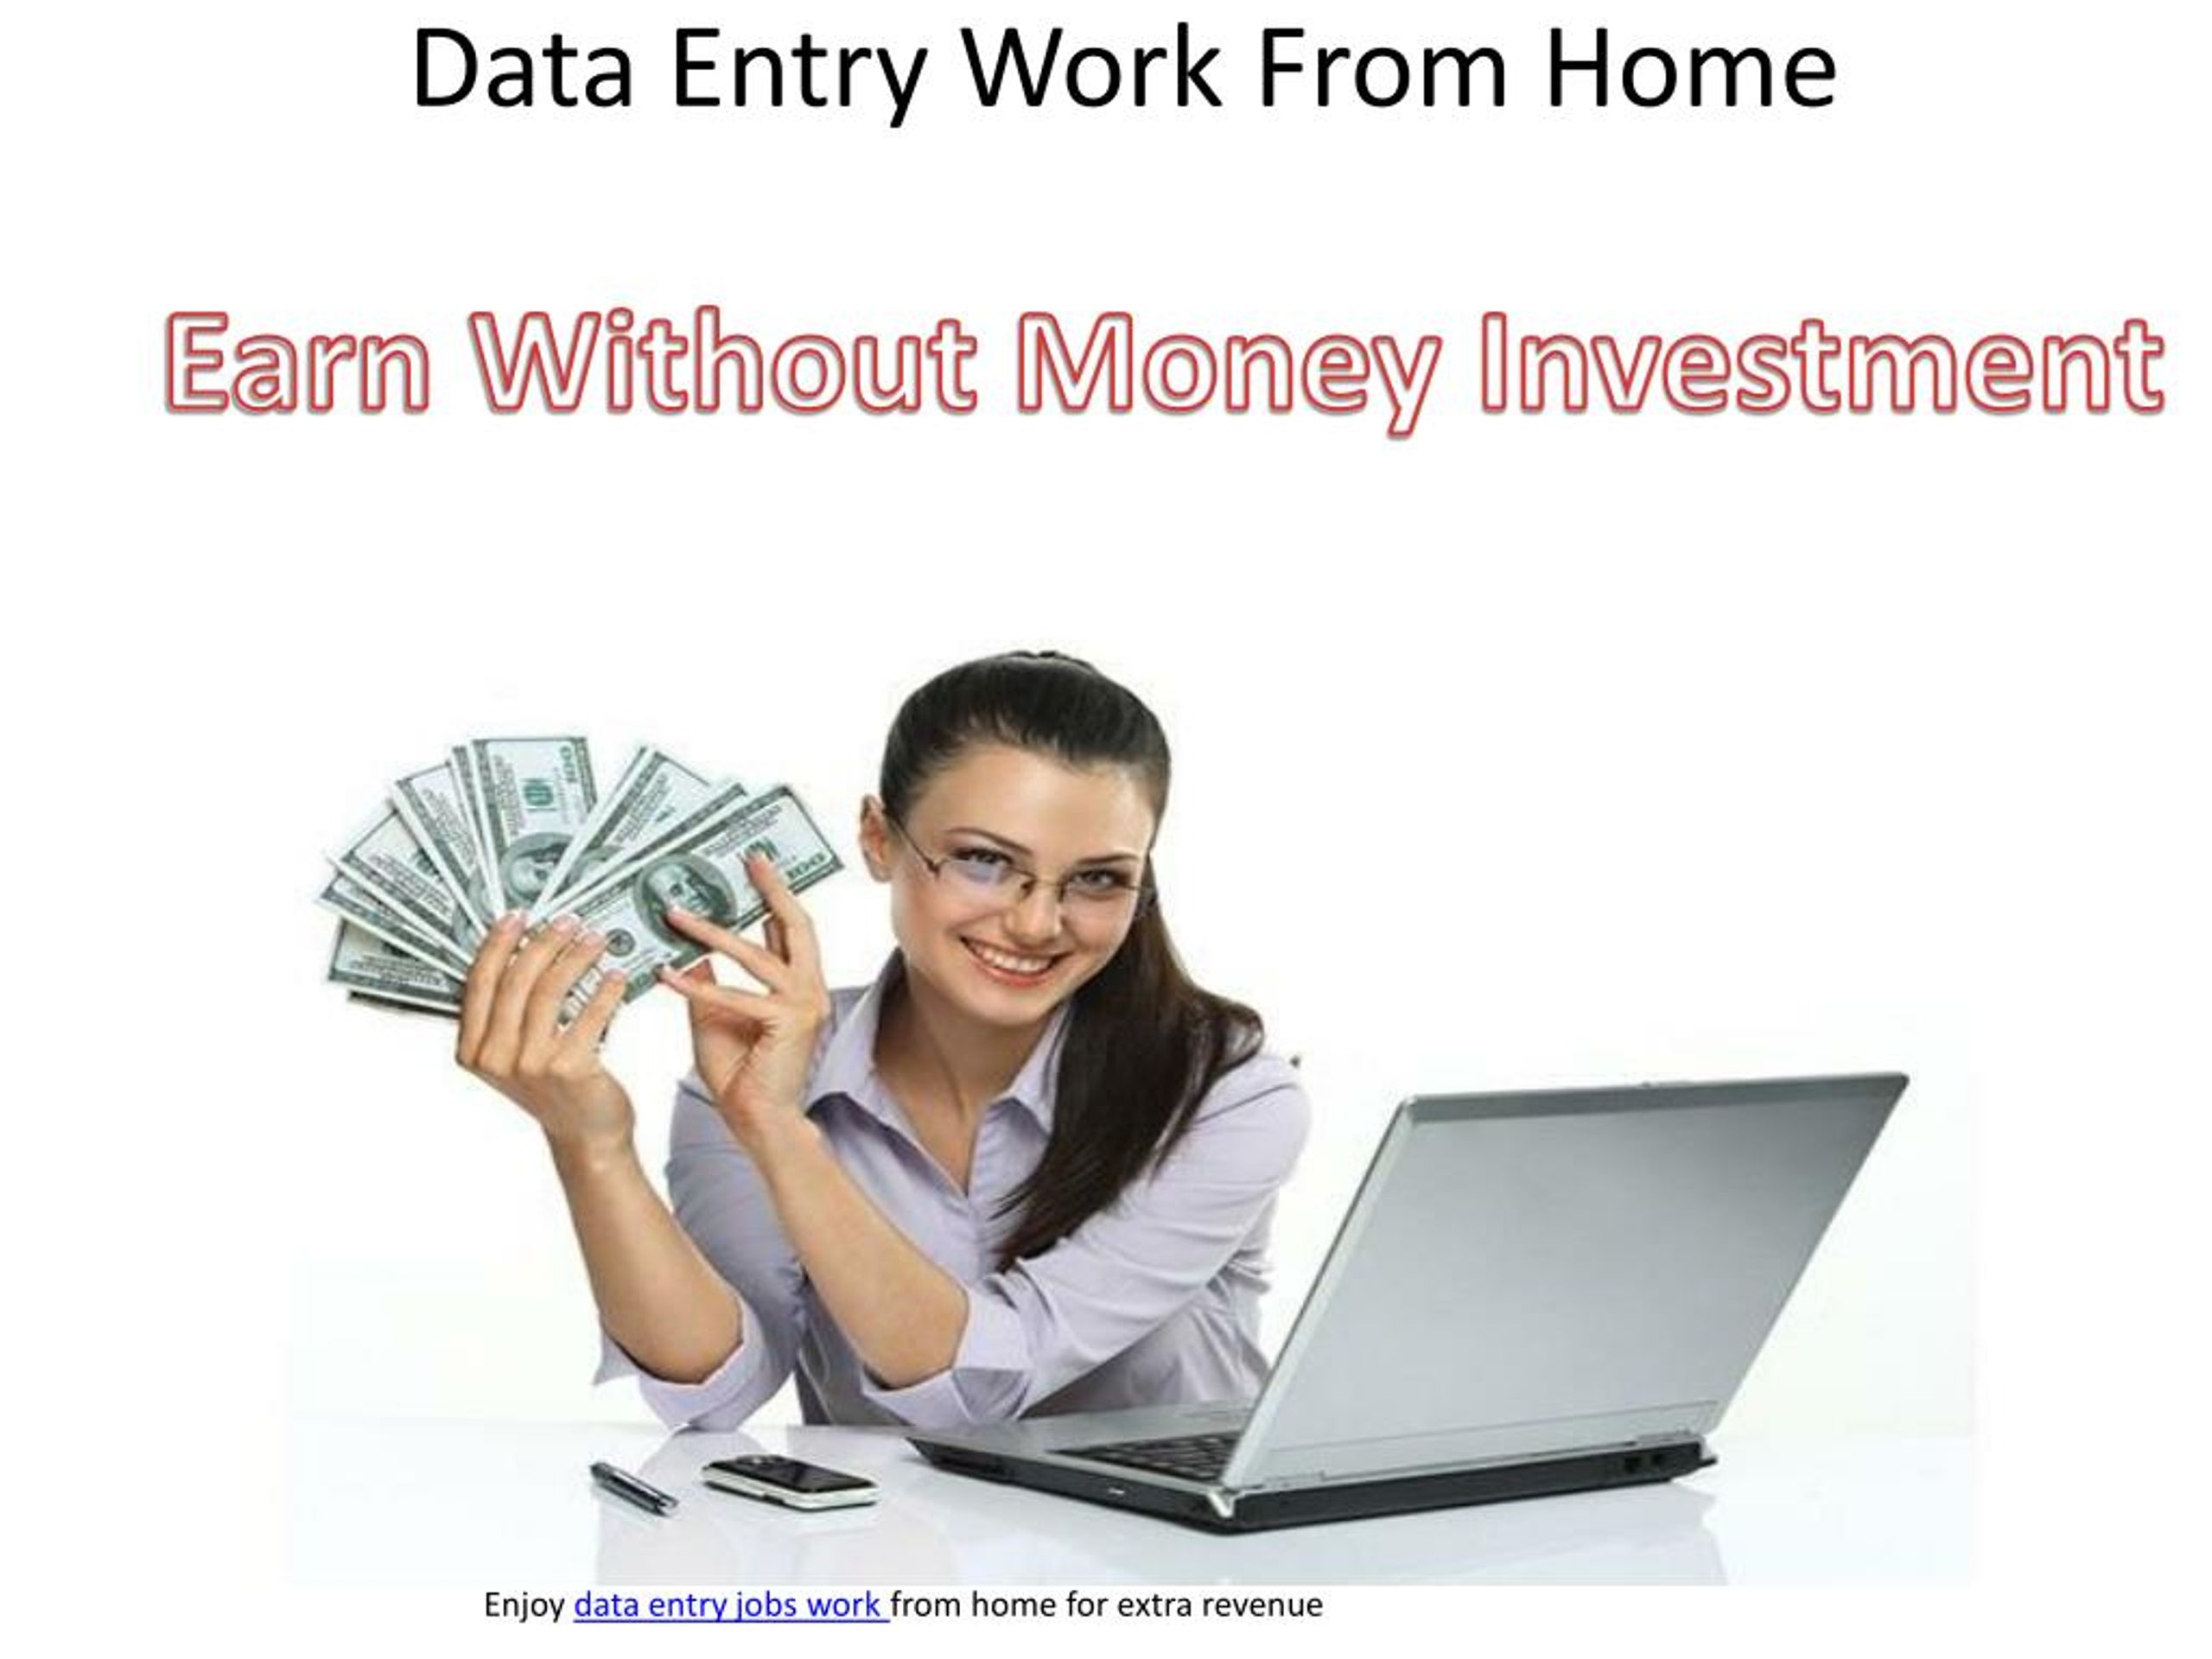 Ppt Online Data Entry Job Work From Home Without Investment Powerpoint Presentation Id 7478035,Red Wine Types List